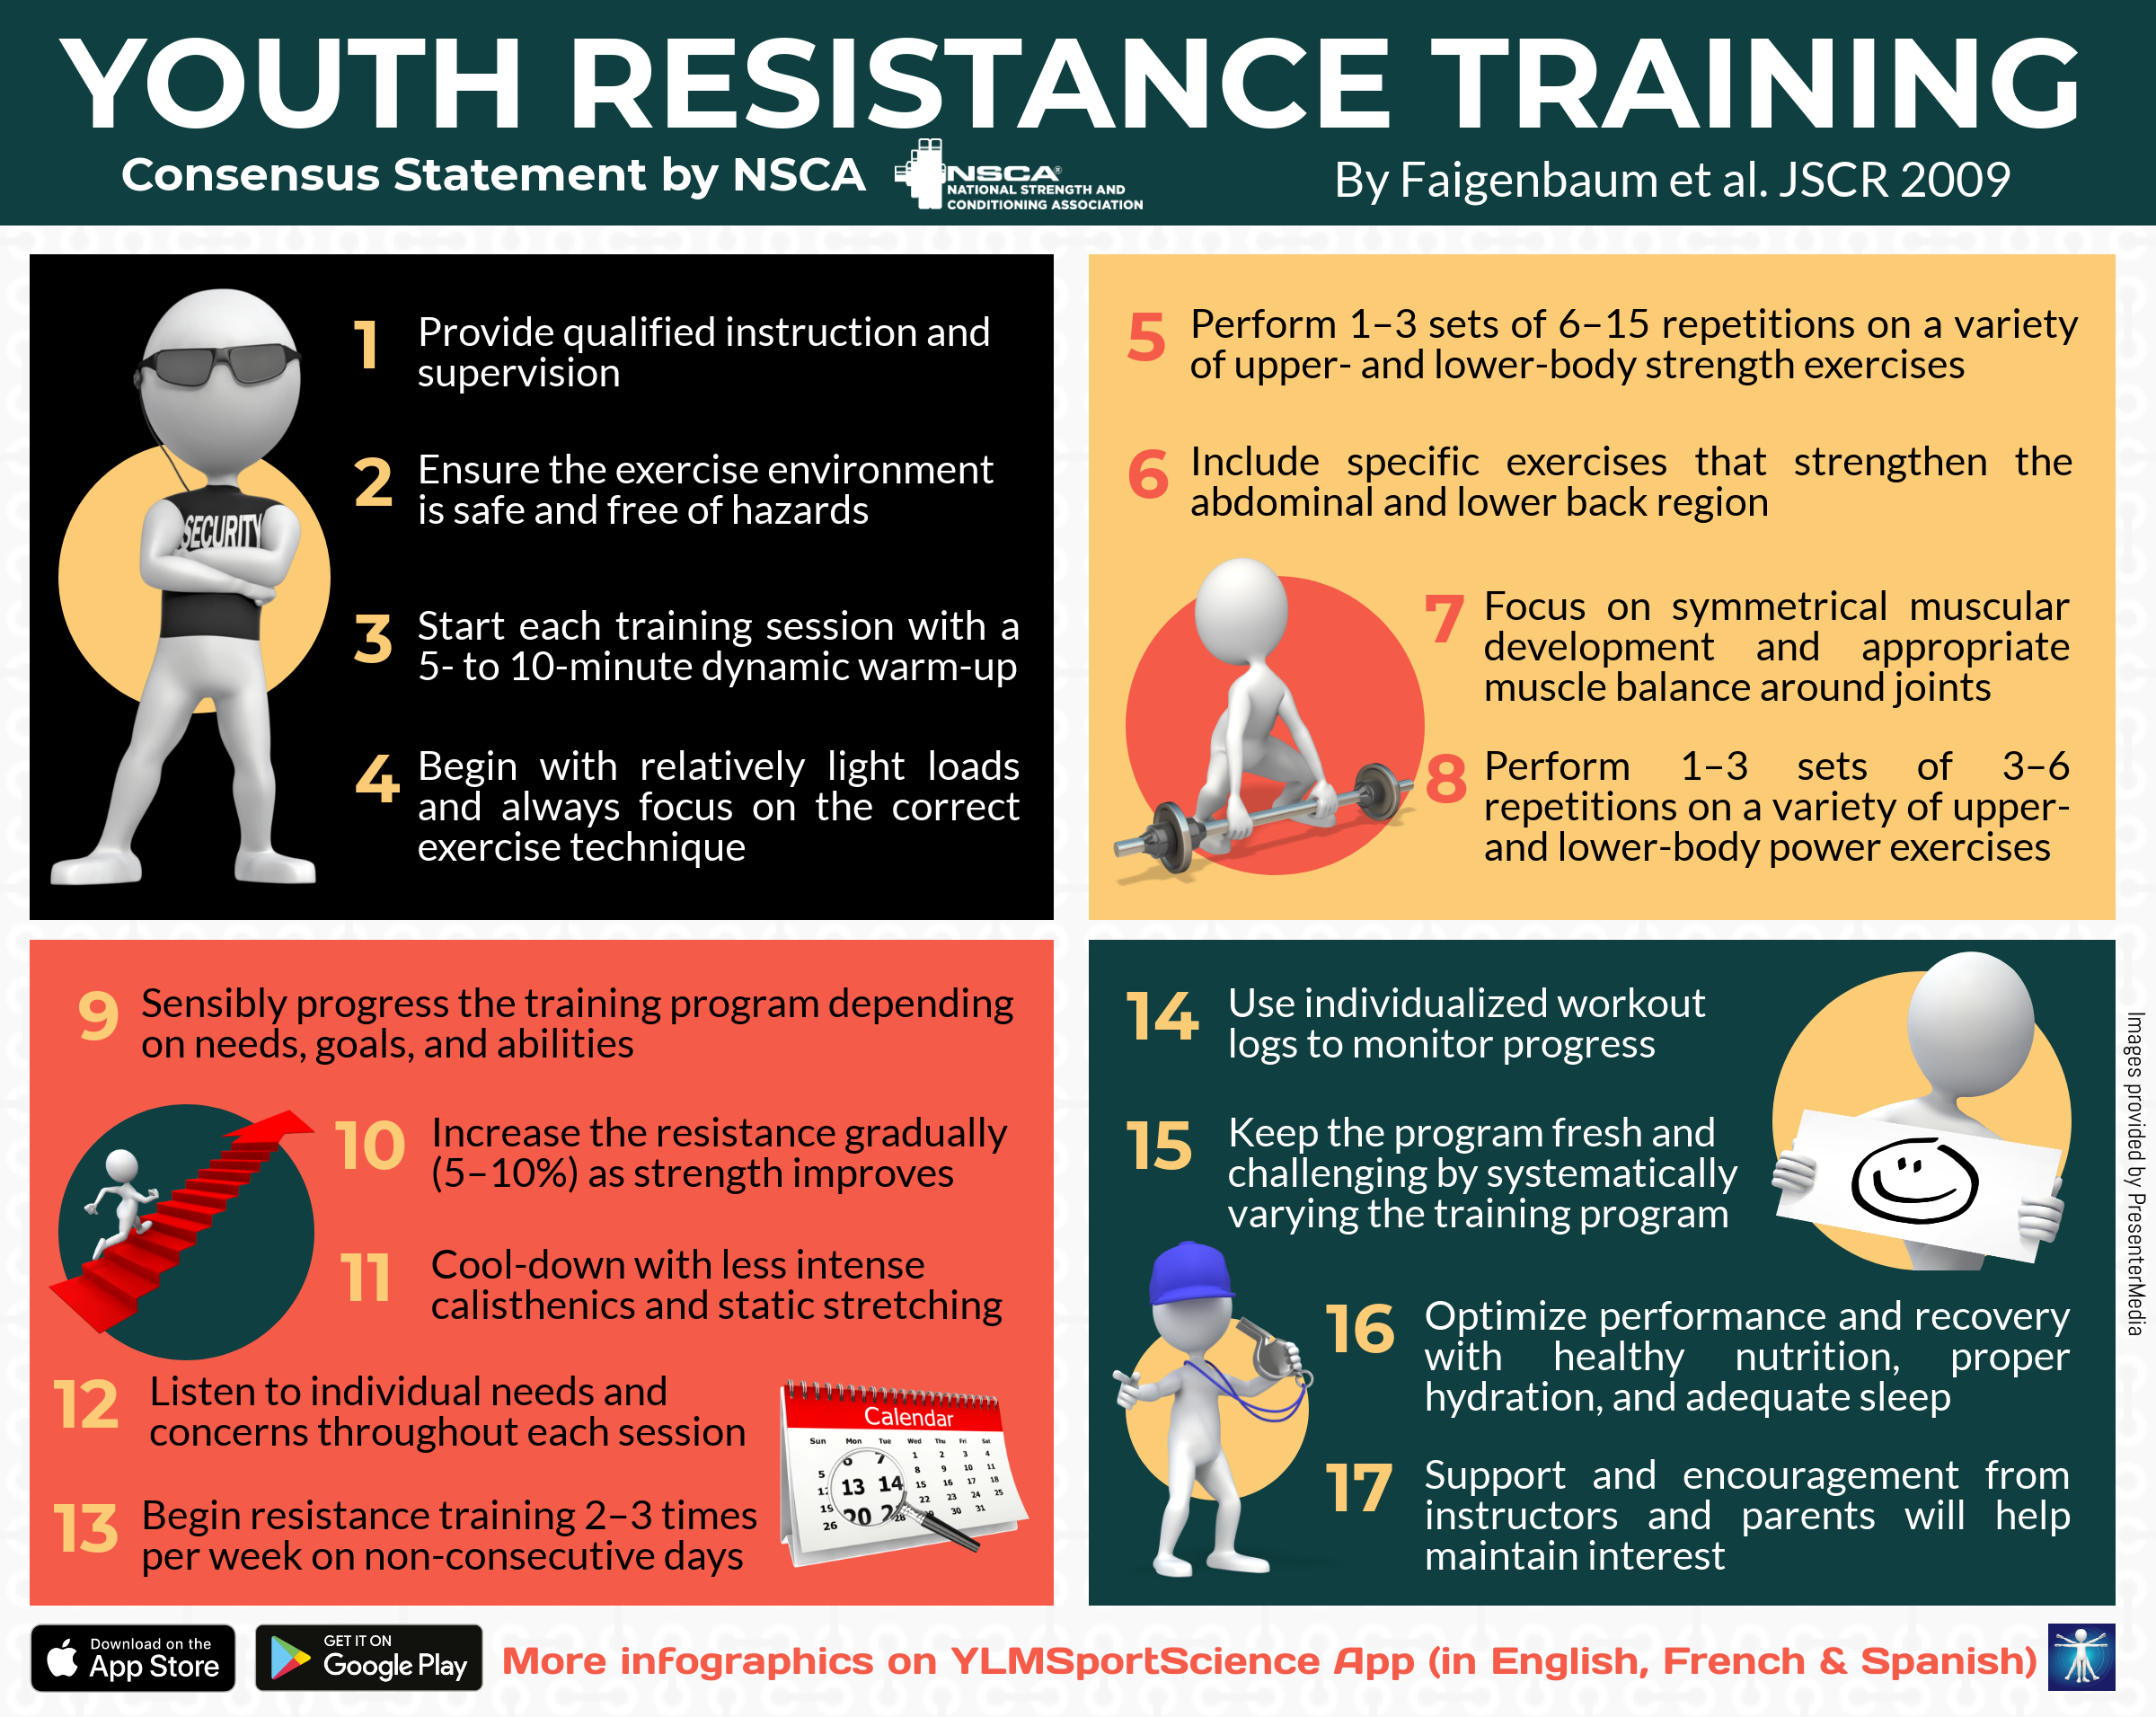 Infographic: Youth Resistance Training